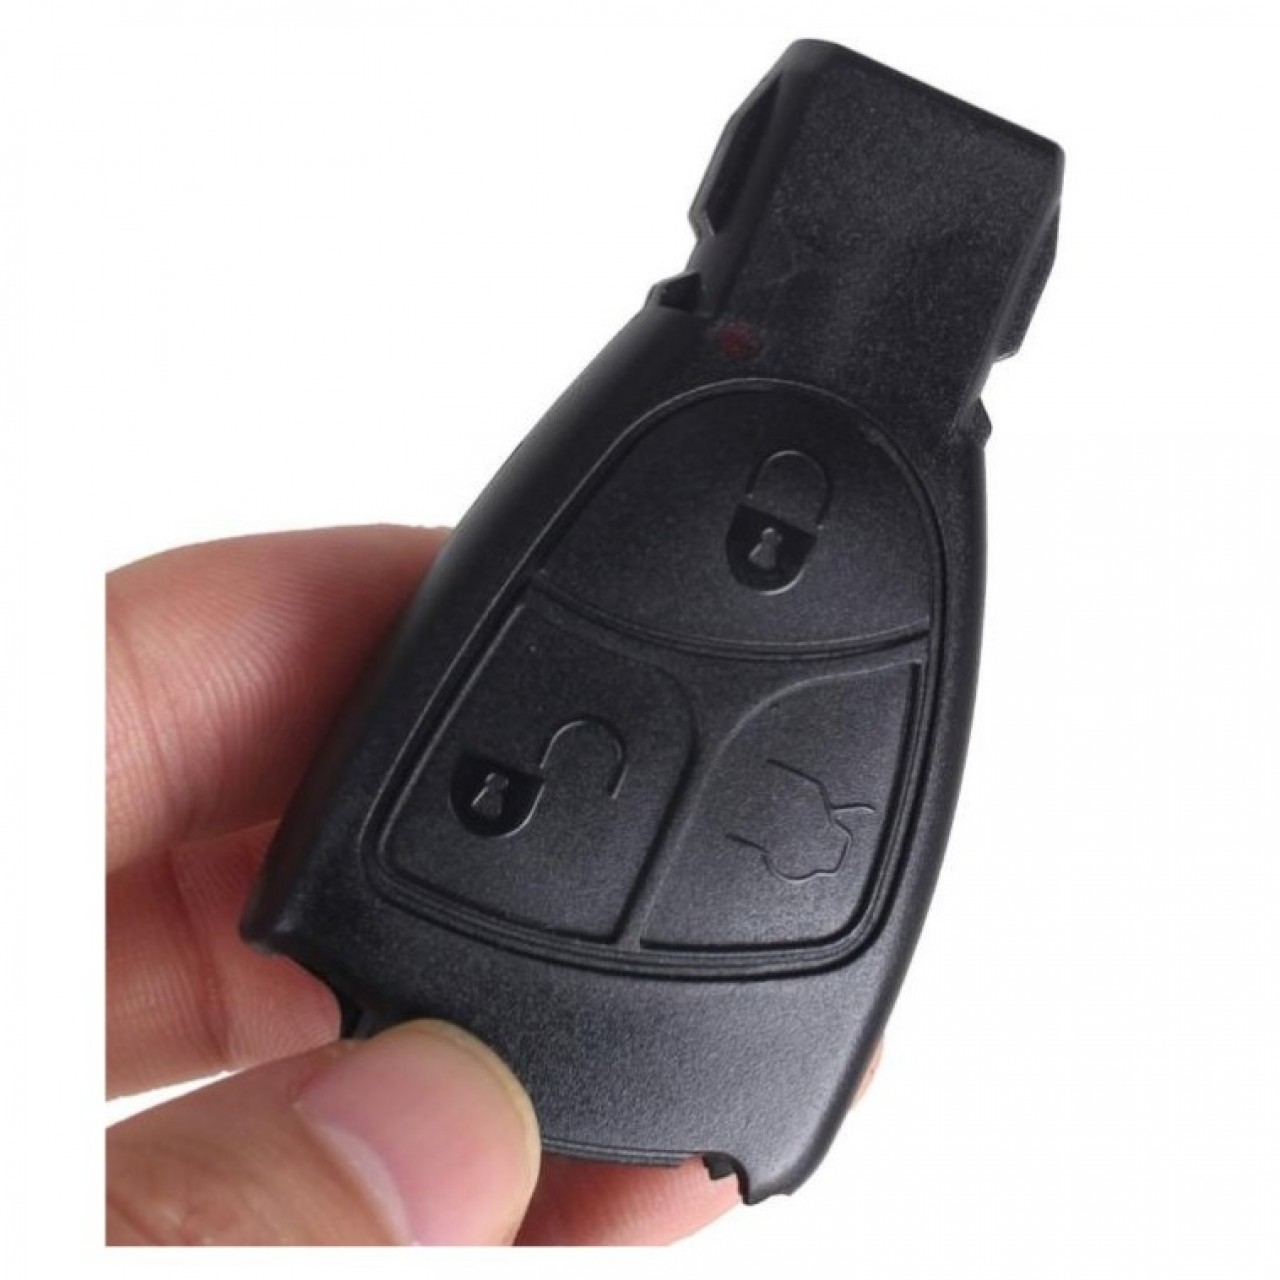 Mercedes Replacements 3 Buttons Remote With Logo Shell Only